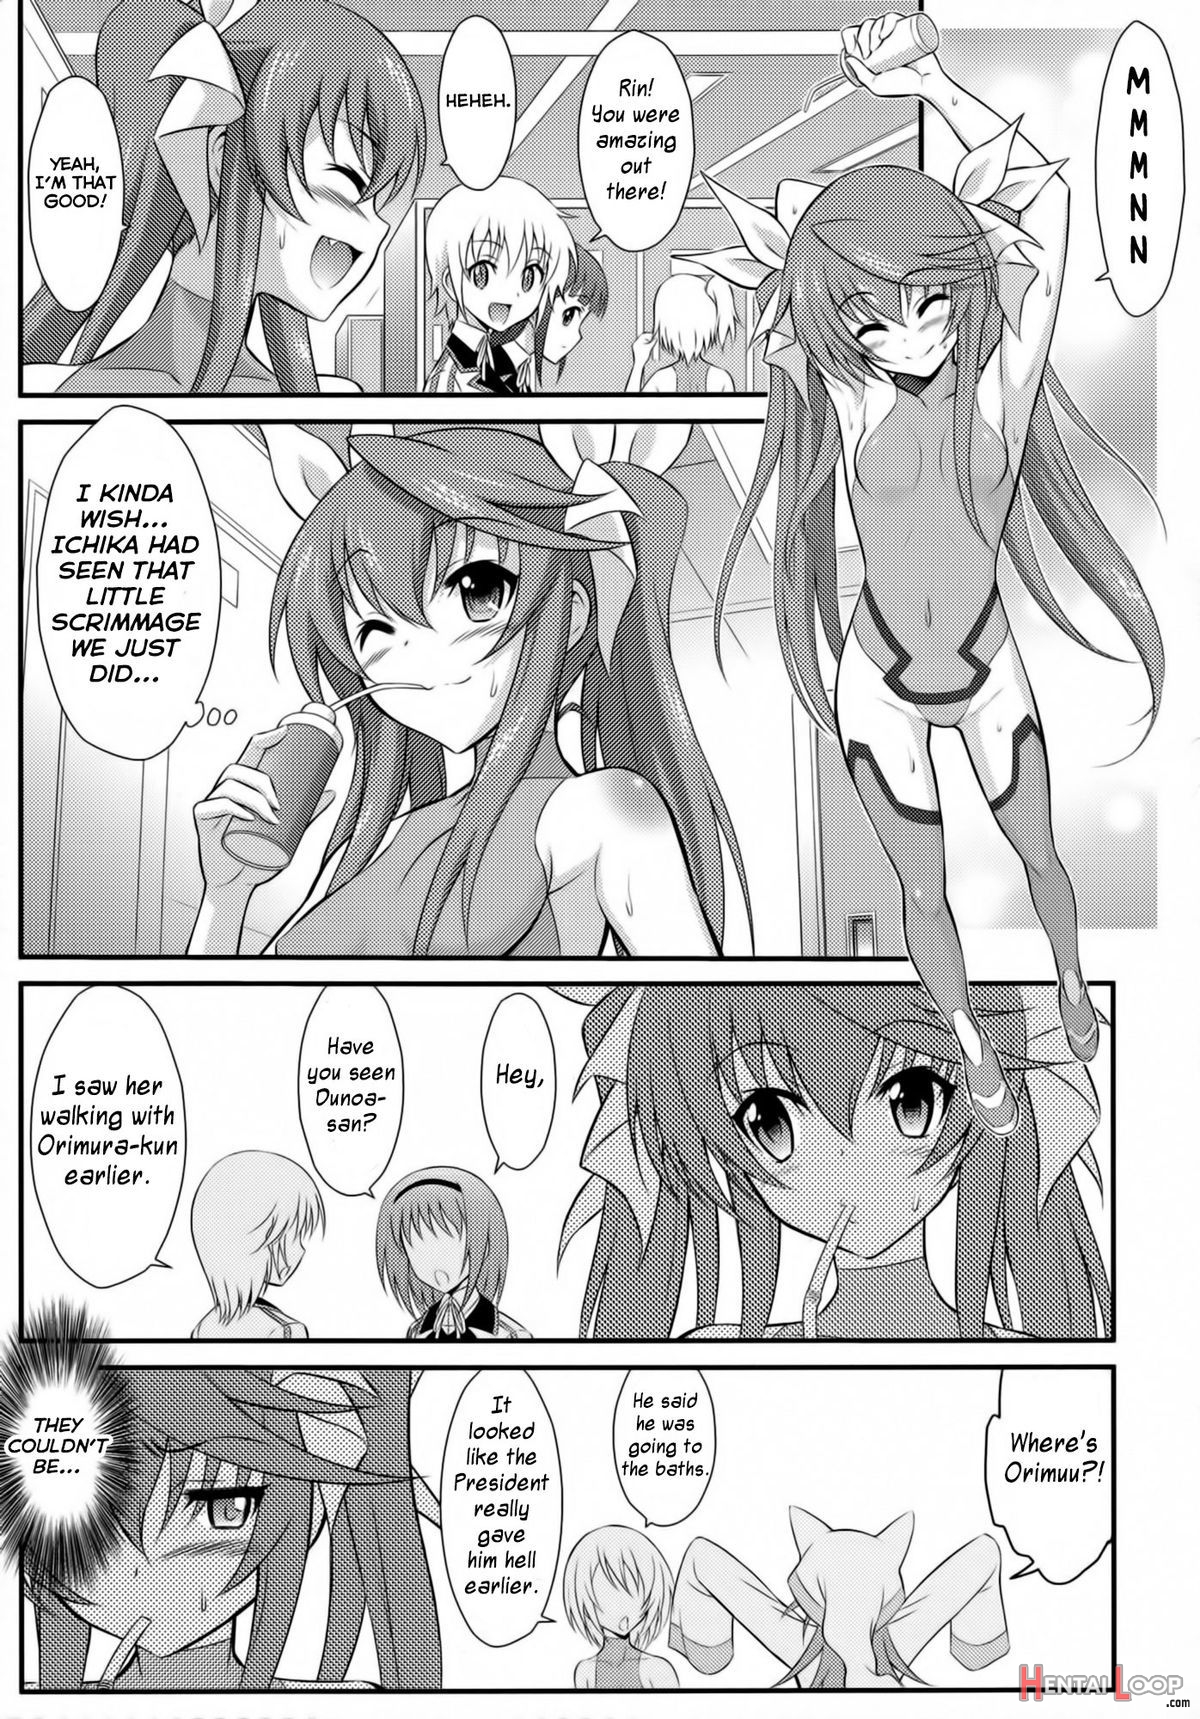 The Second Childhood Friend Has Small, Sensitive Breasts! page 3